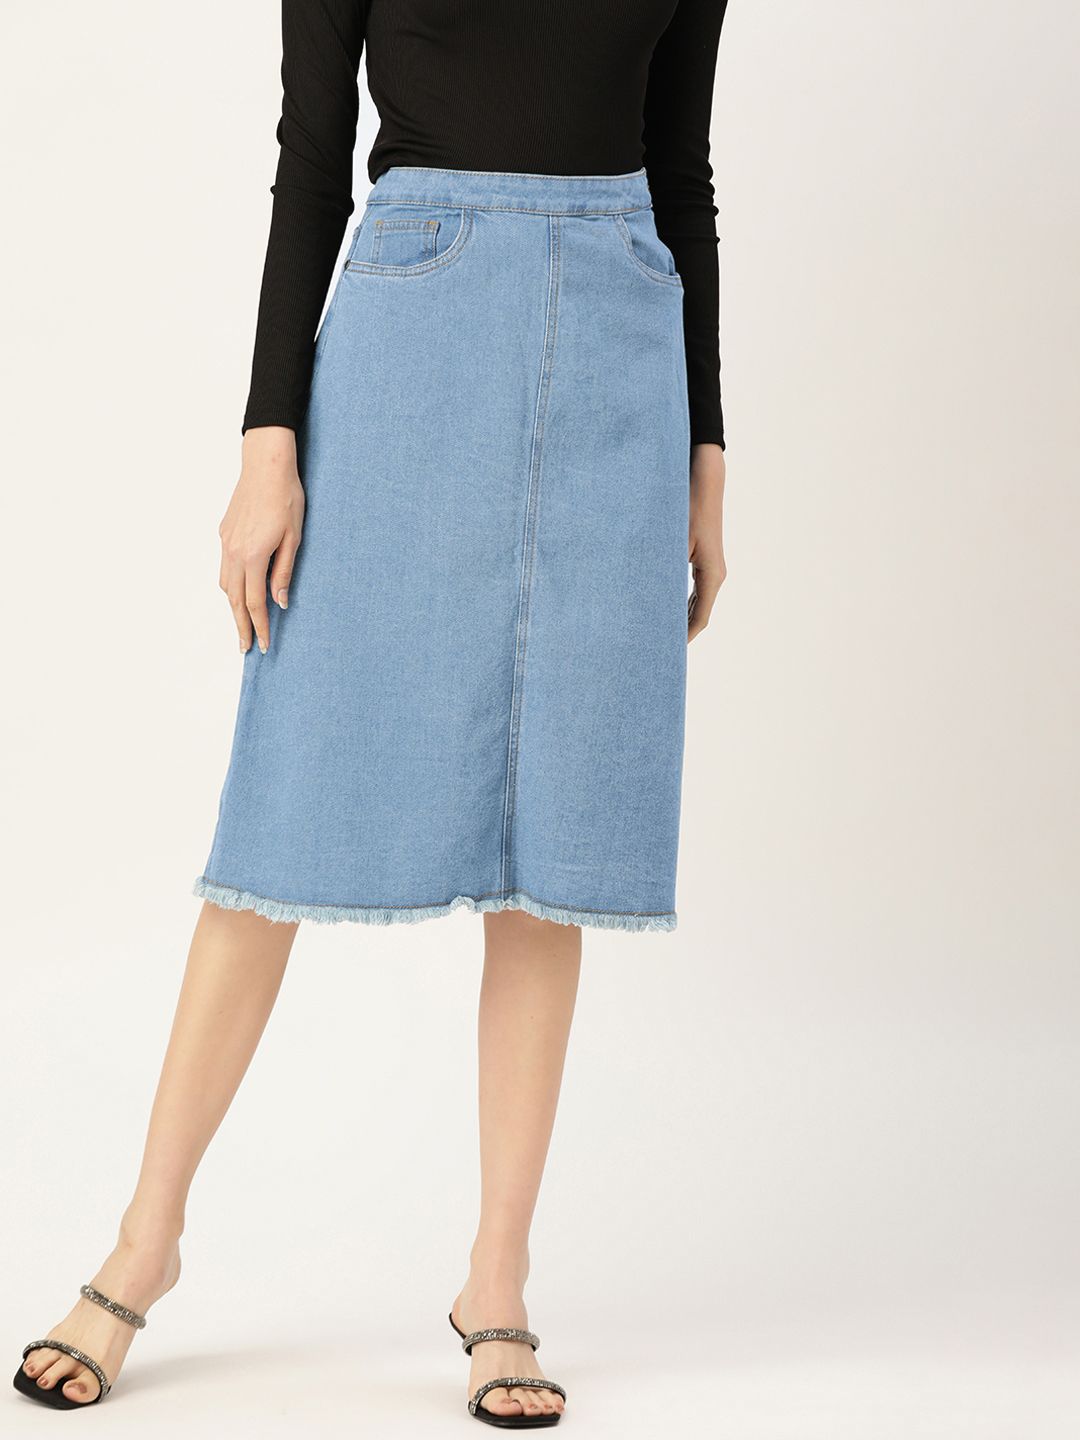 all about you Blue Denim A-Line Skirt Price in India